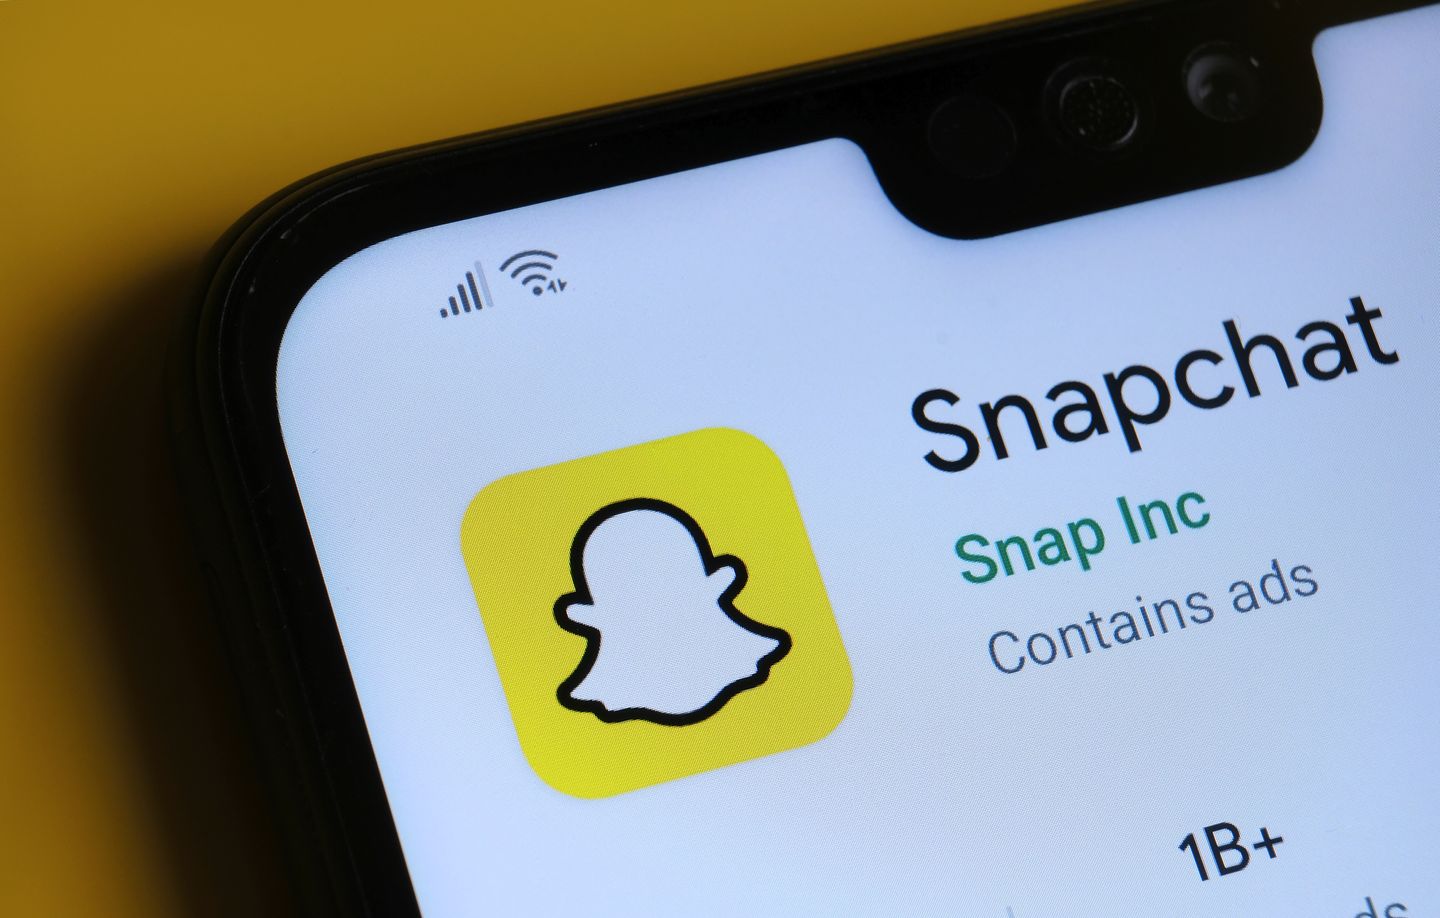 How to Use Extend Snaps Feature on Snapchat